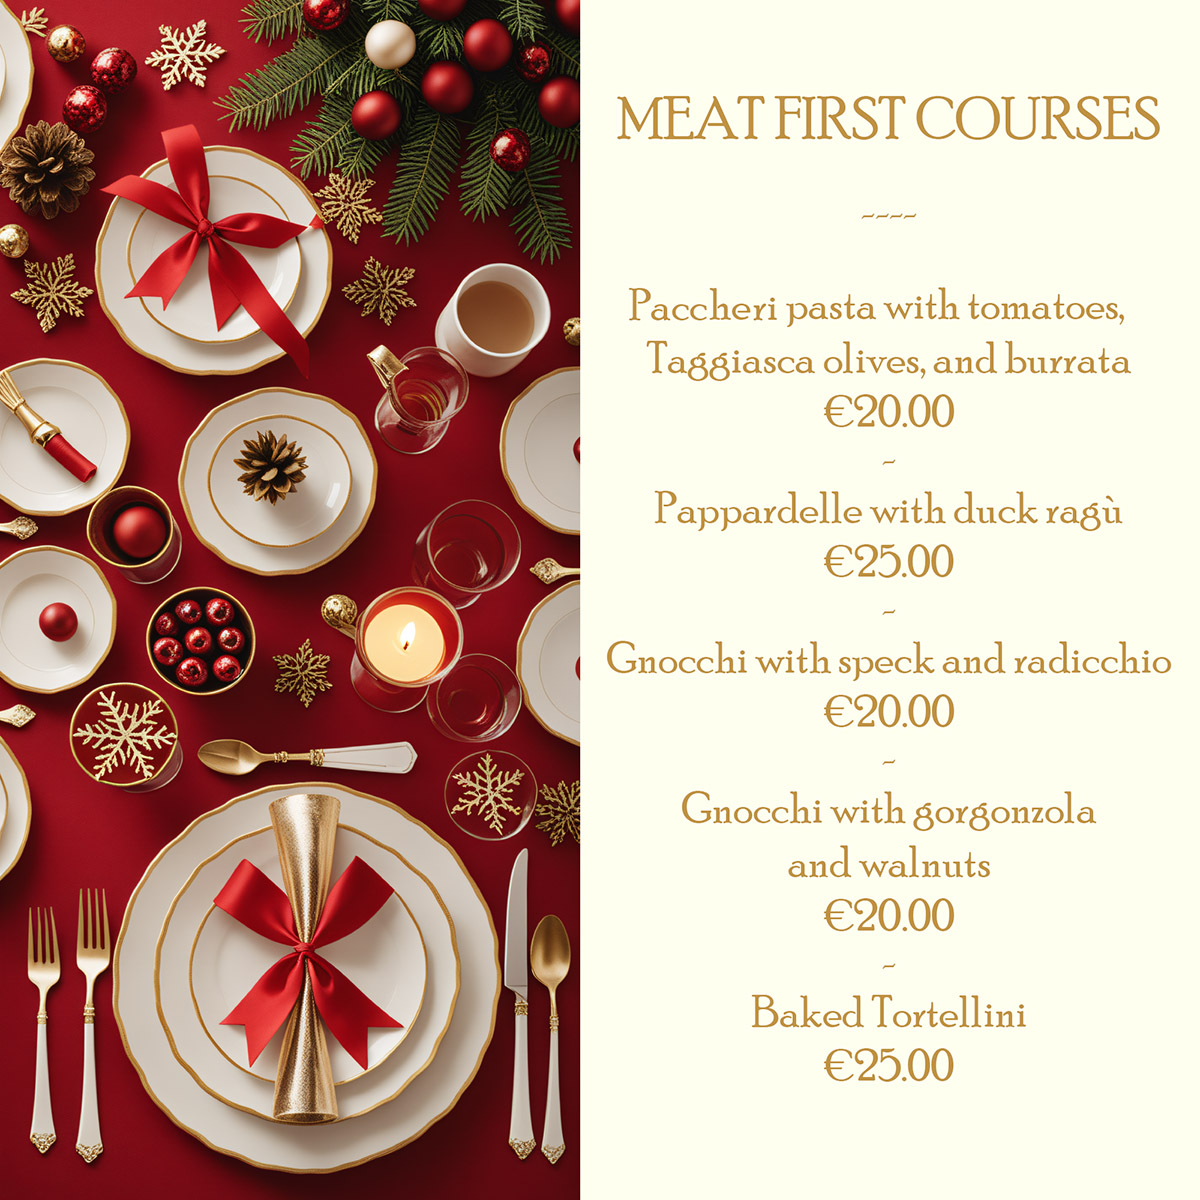 Meat First Courses